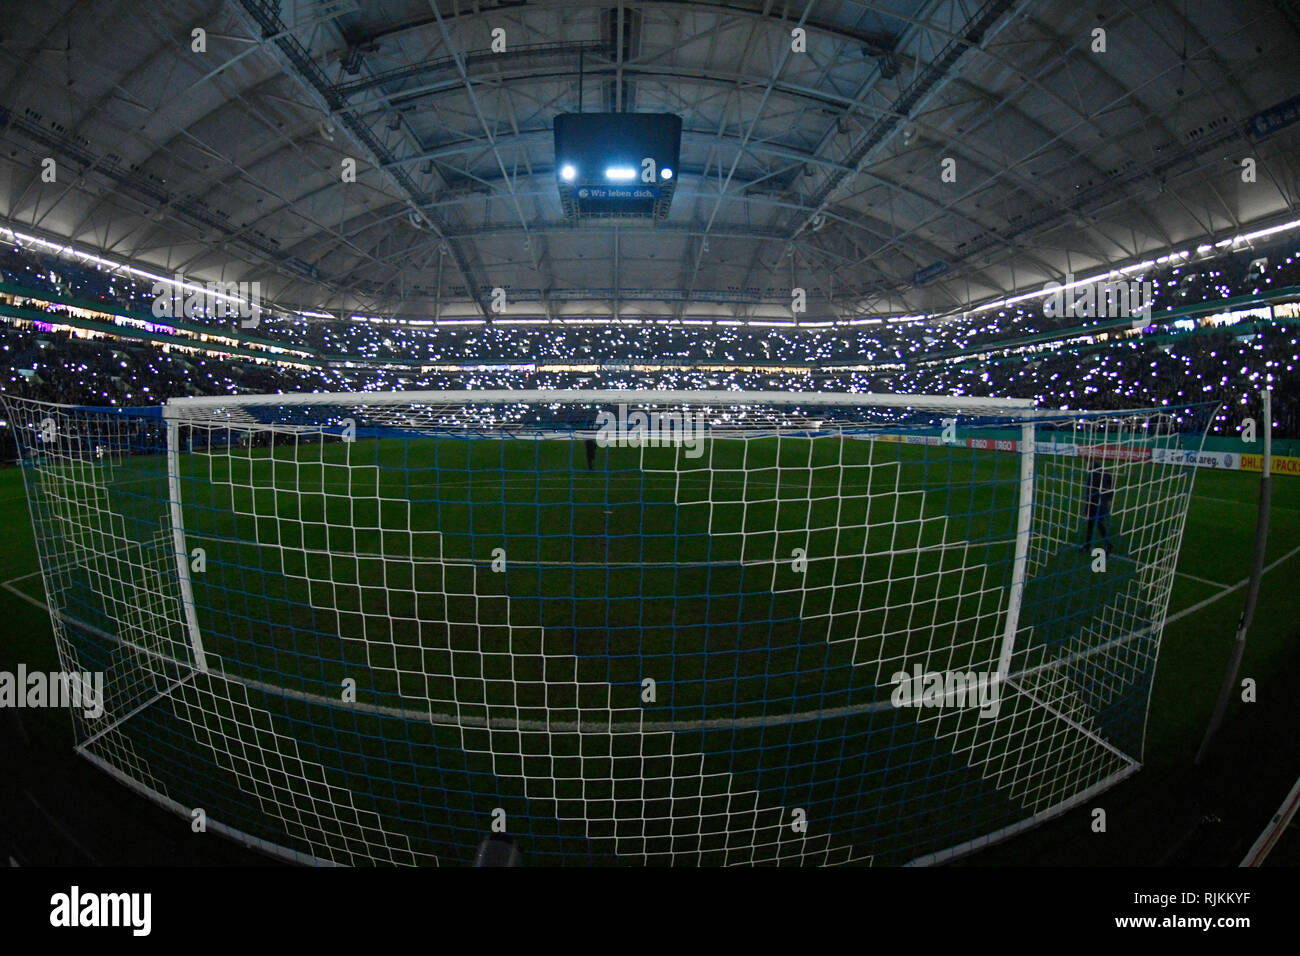 Veltins-Arena Gelsenkirchen, Germany. 6th Feb, 2019. Football German Cup, DFB Pokal Season 2018/19 round of sixteen, Schalke 04 (S04) vs. Fortuna Dusseldorf (Duesseldorf) --- interior of Schalke Arena with closed roof, illuminated by mobile phone lights Stock Photo